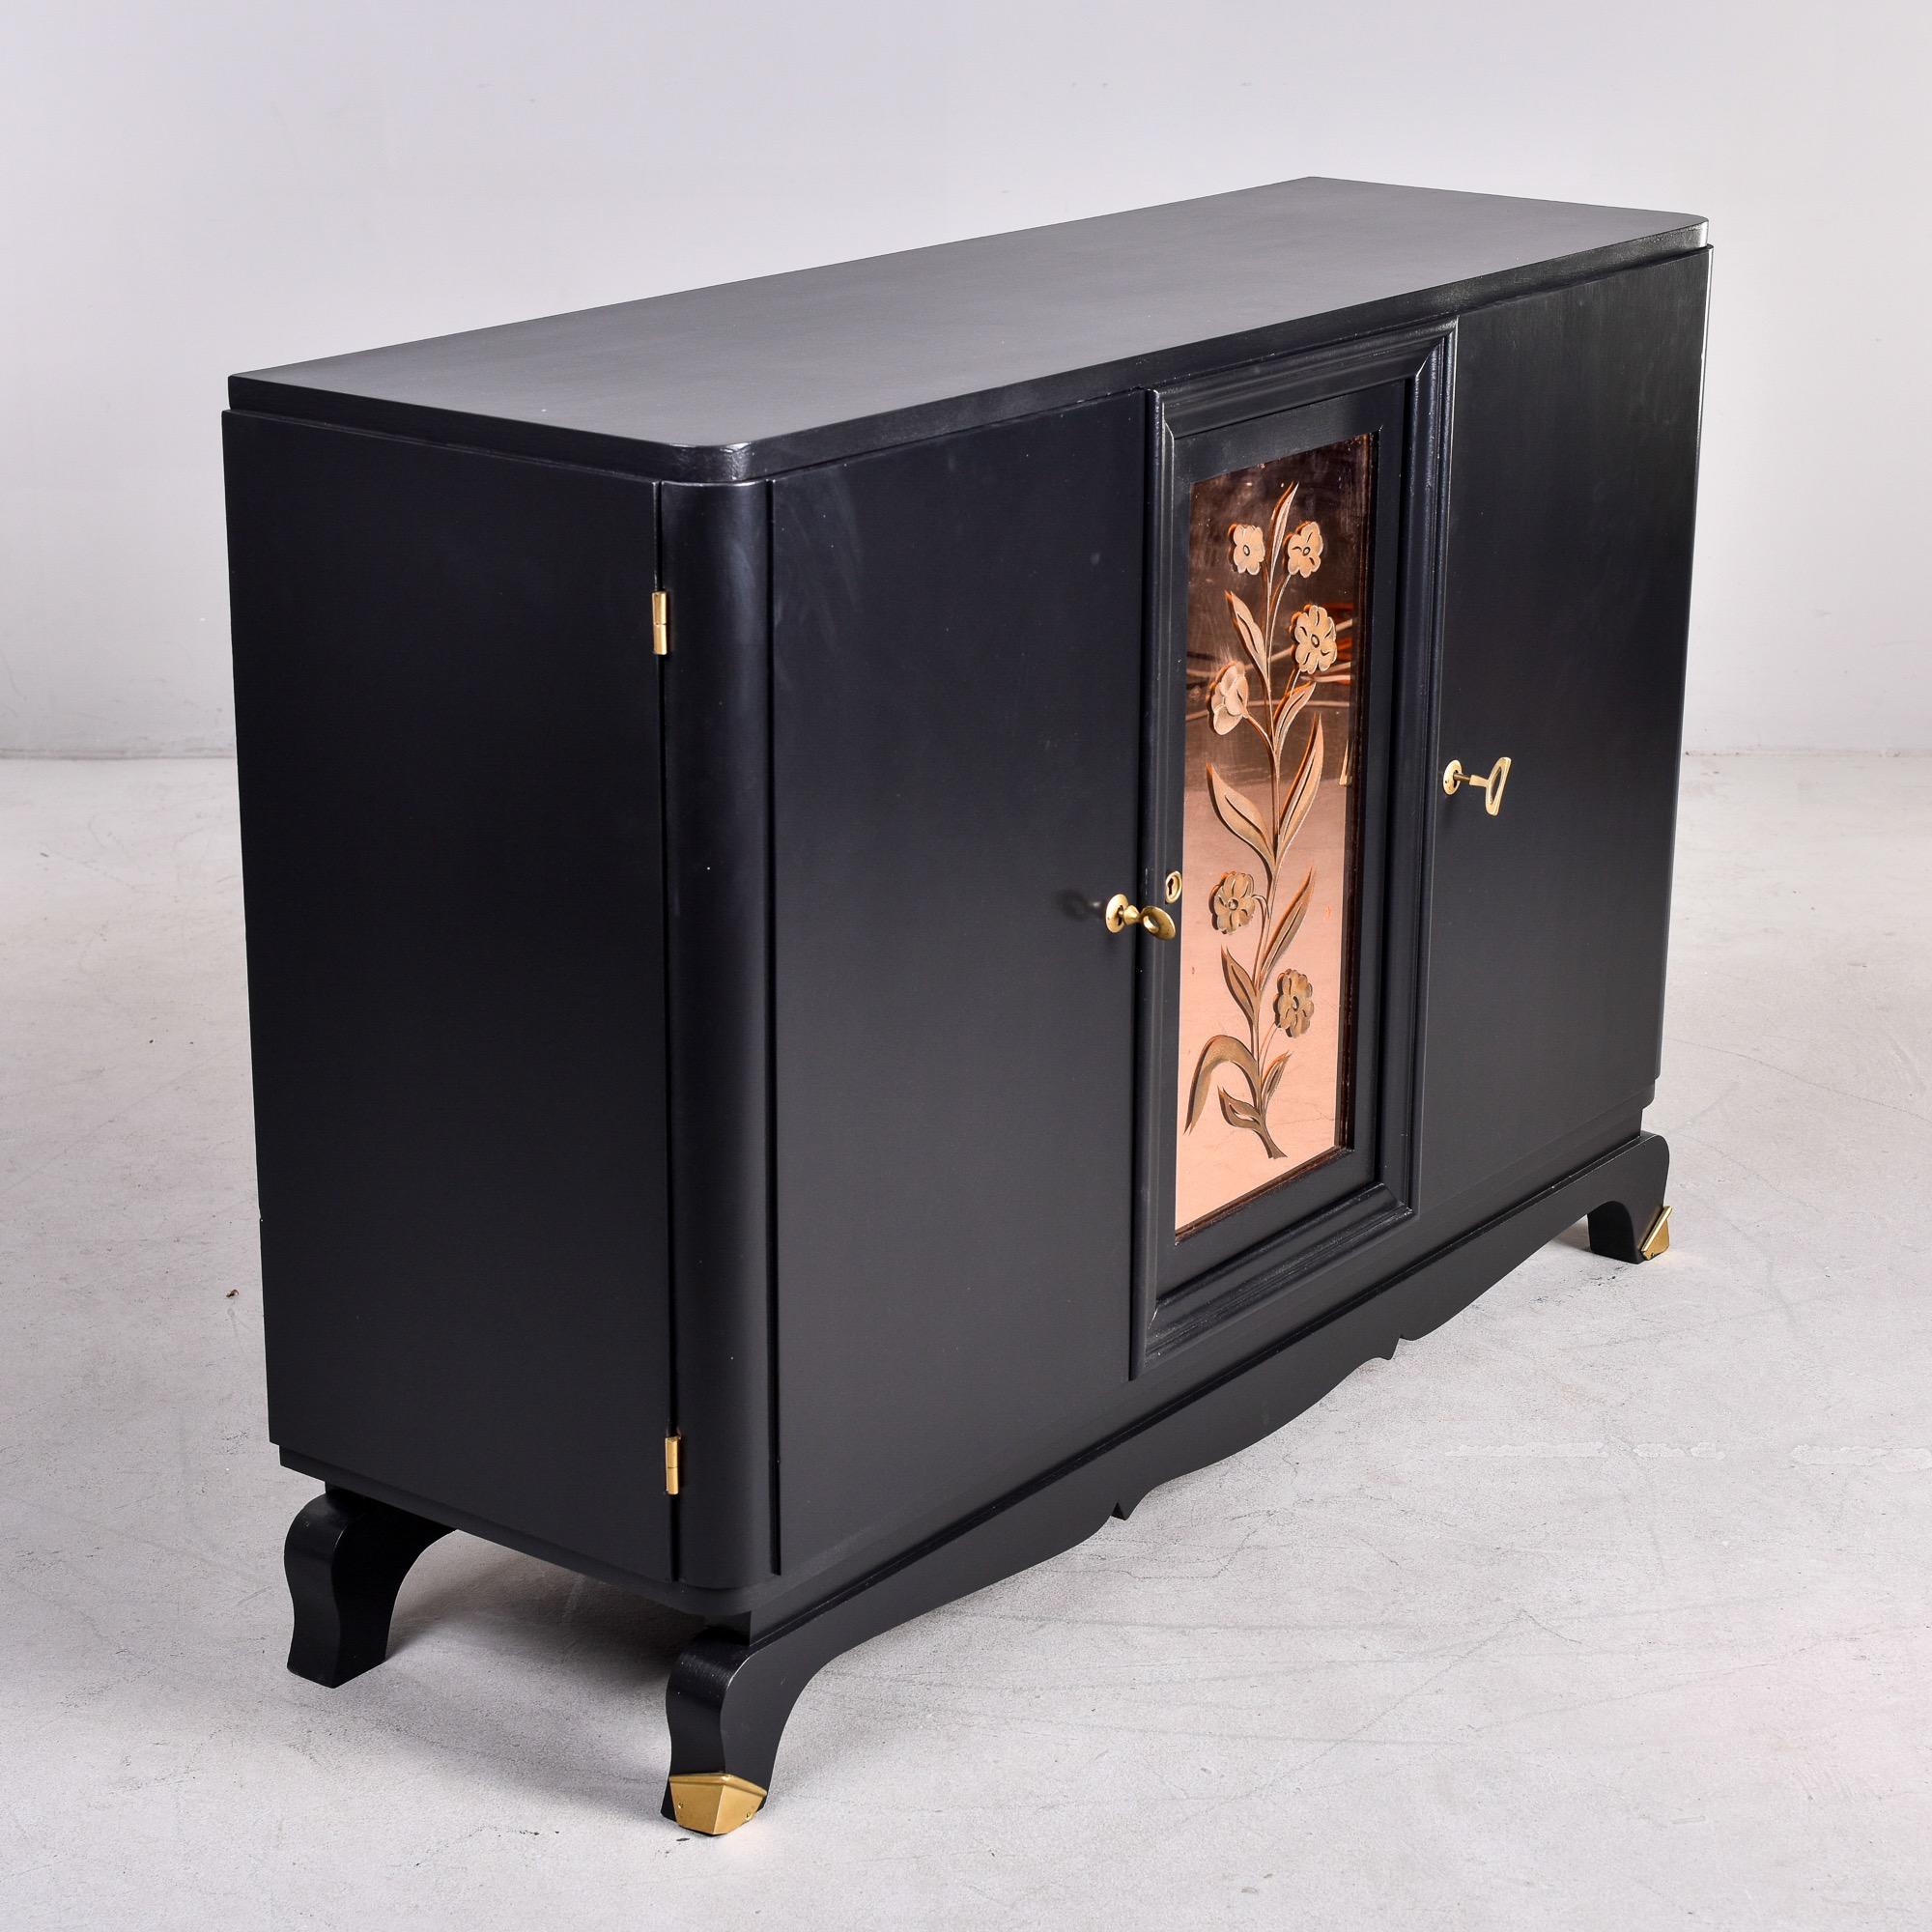 Brass French Art Deco Buffet Cabinet with Black Finish and Mirrored Center Panel